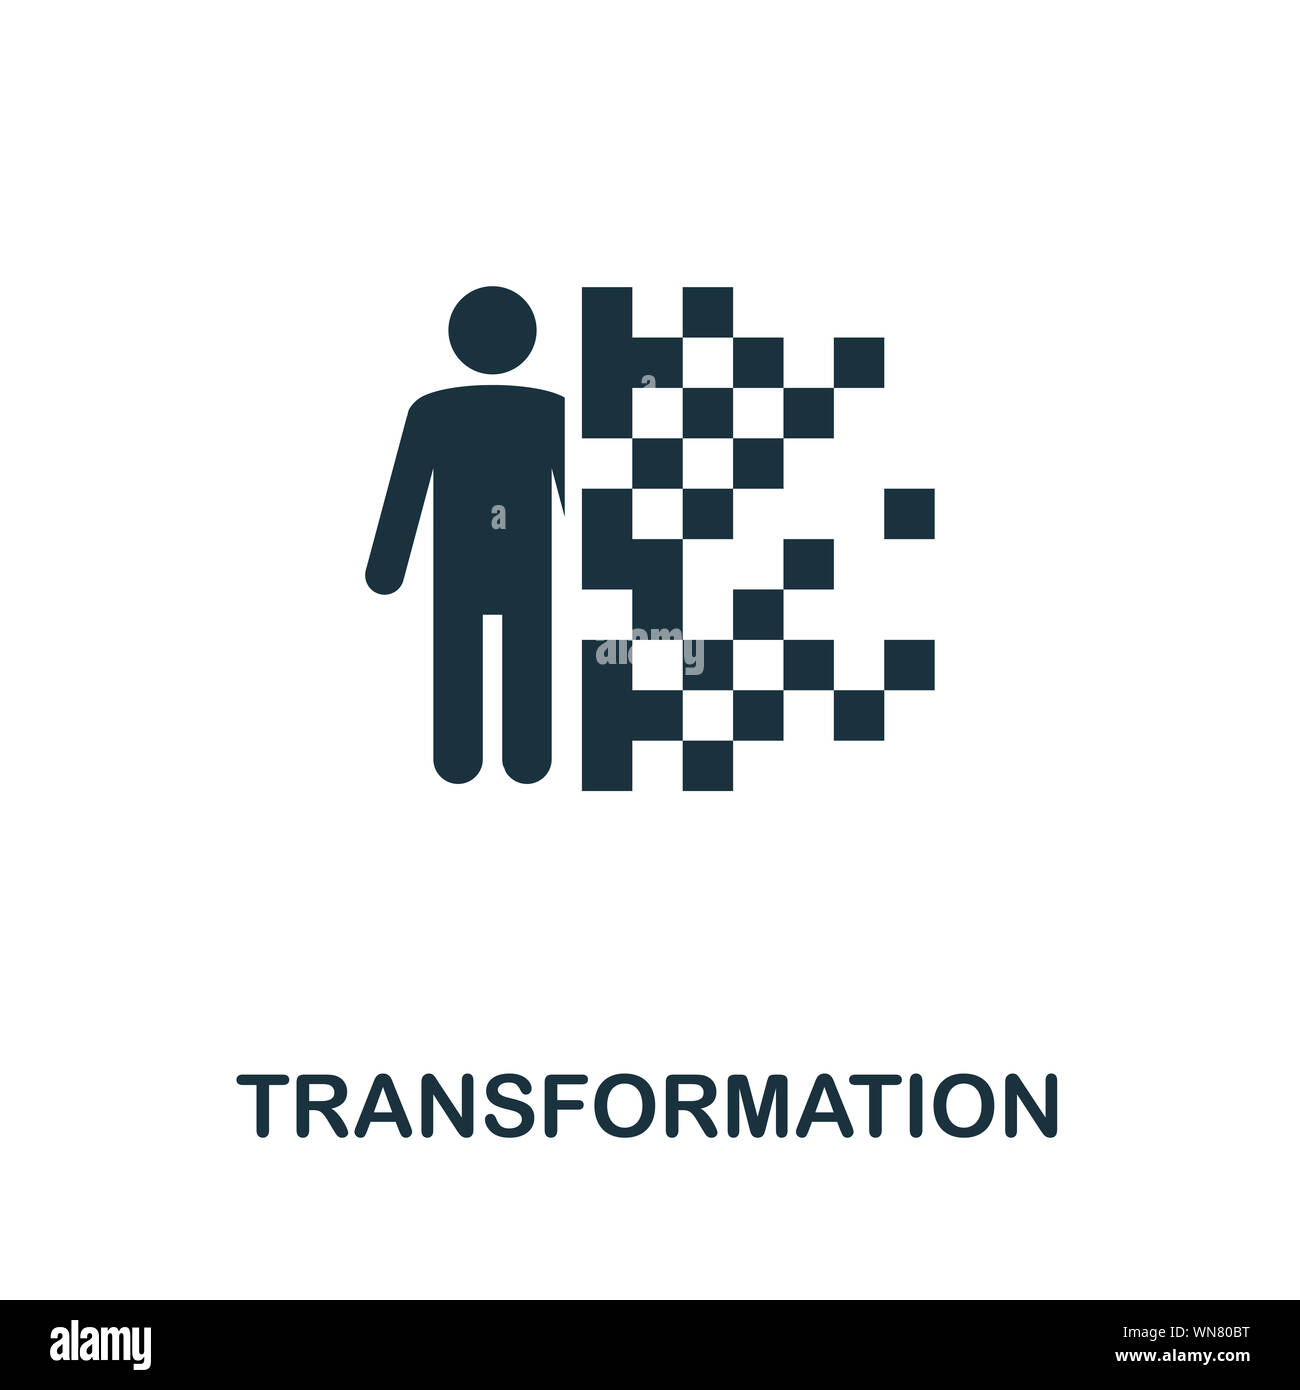 Transformation icon symbol. Creative sign from biotechnology icons collection. Filled flat Transformation icon for computer and mobile Stock Photo